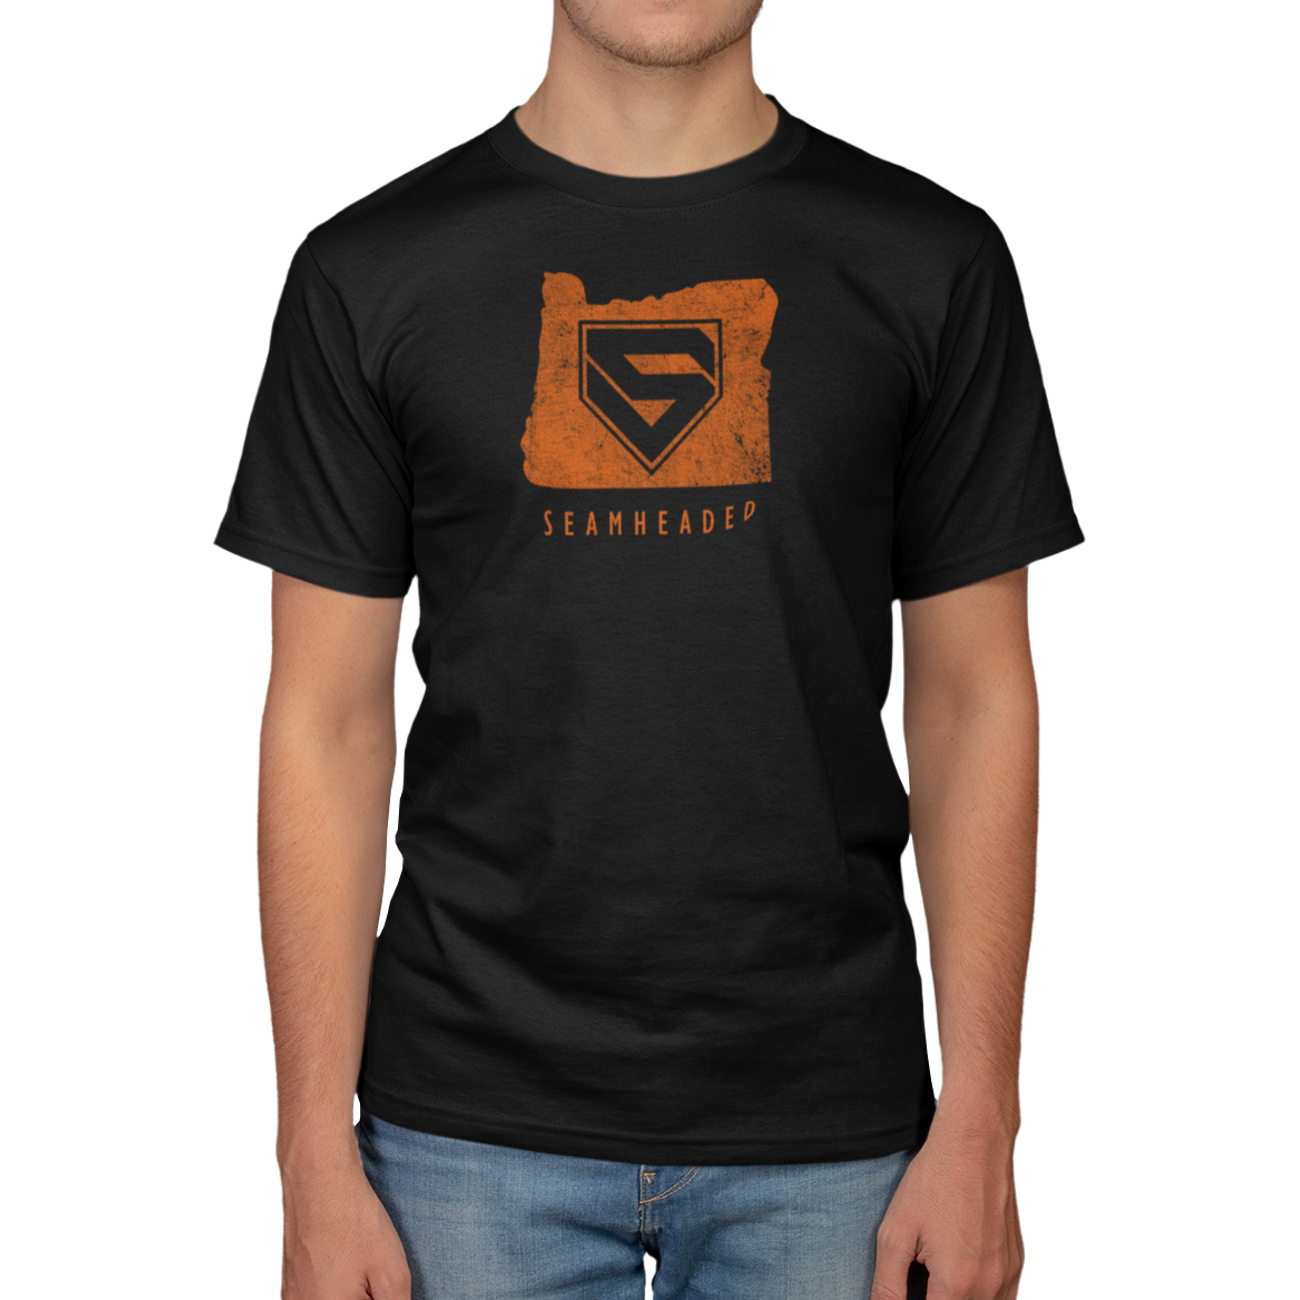 Beaver State Men's Tee from Seamheaded Apparel